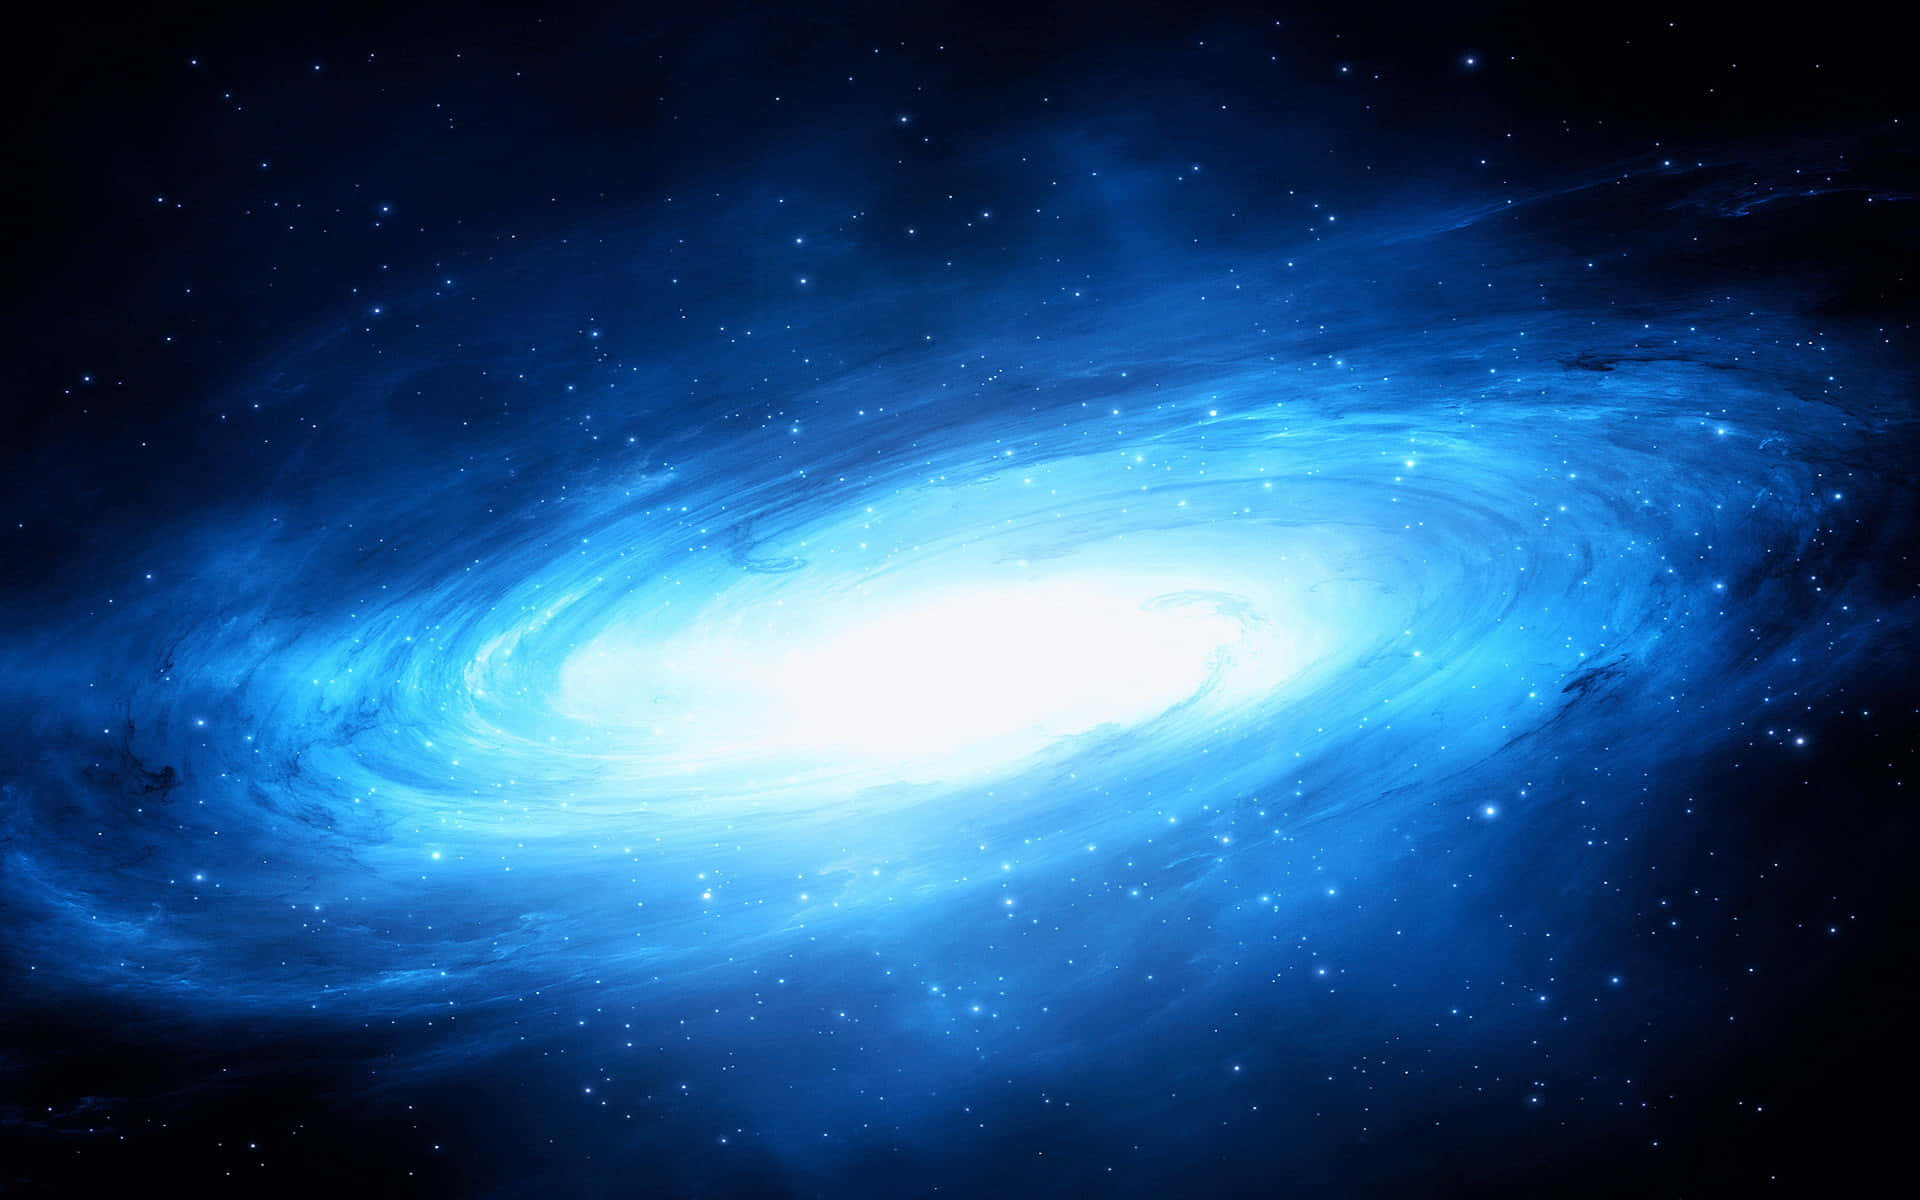 Admire The Beauty Of The Cool Blue Galaxy Wallpaper